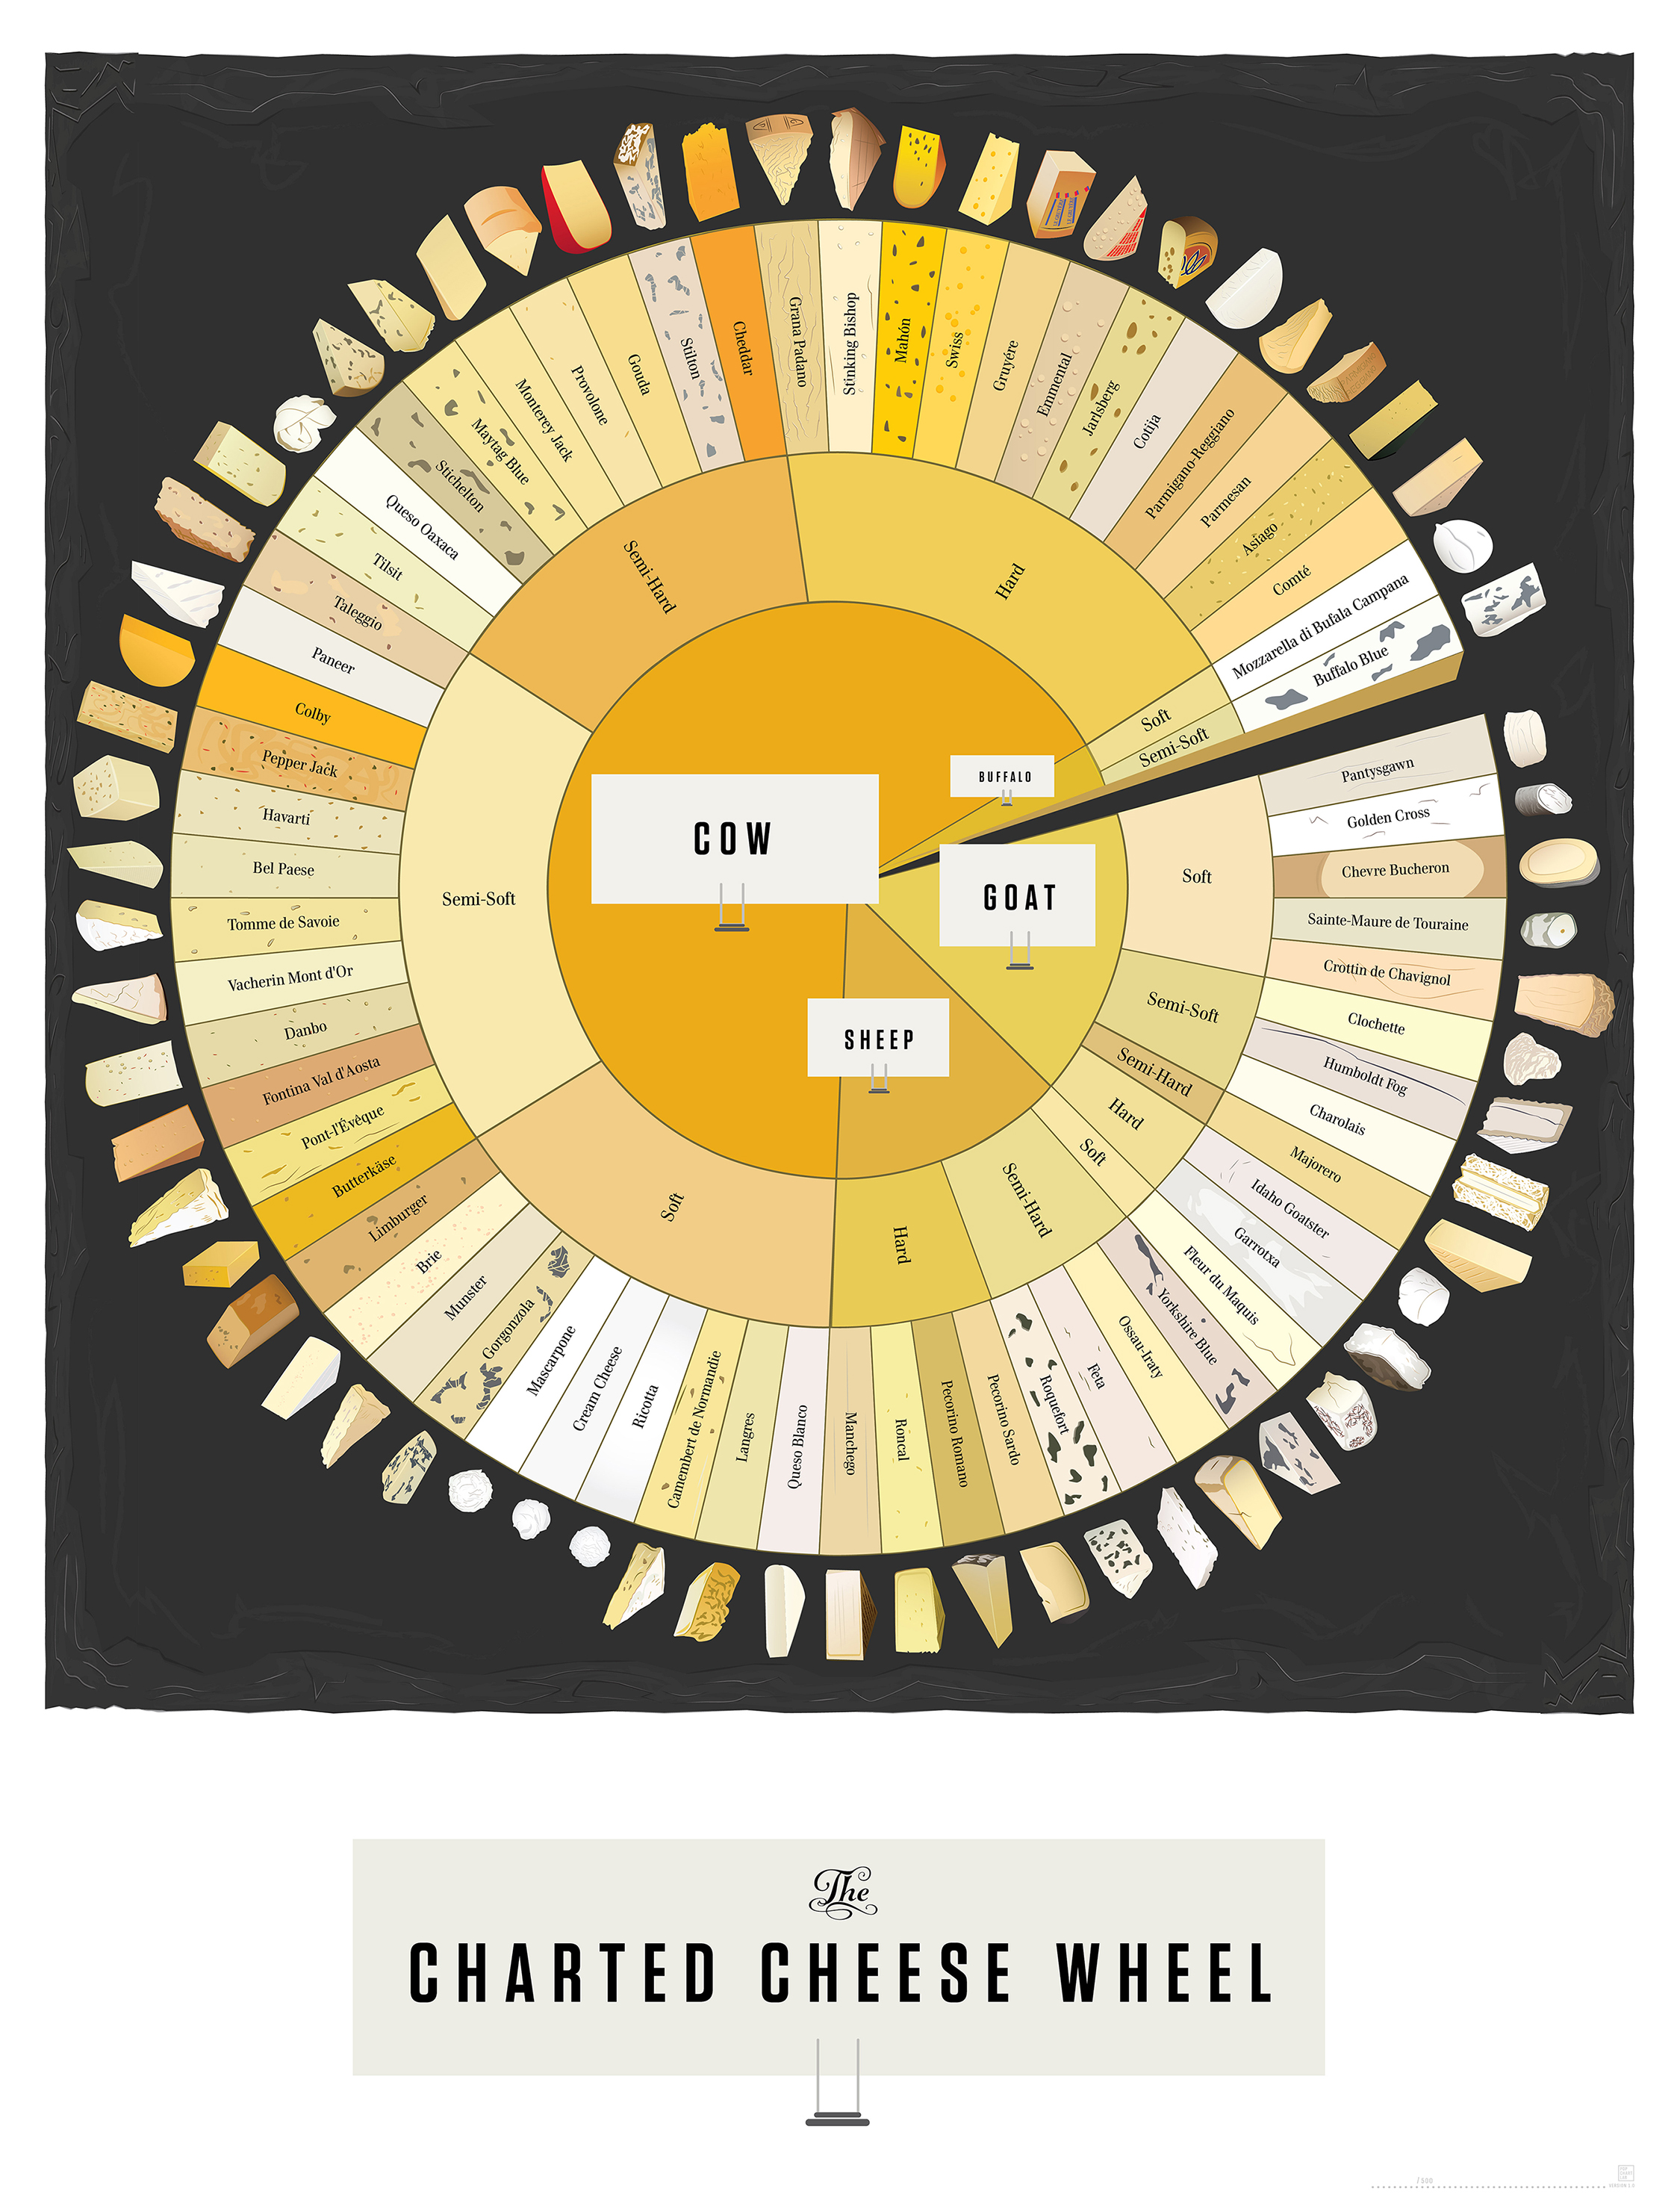 66 types of cheese in one helpful chart [infographic] - Alltop Viral